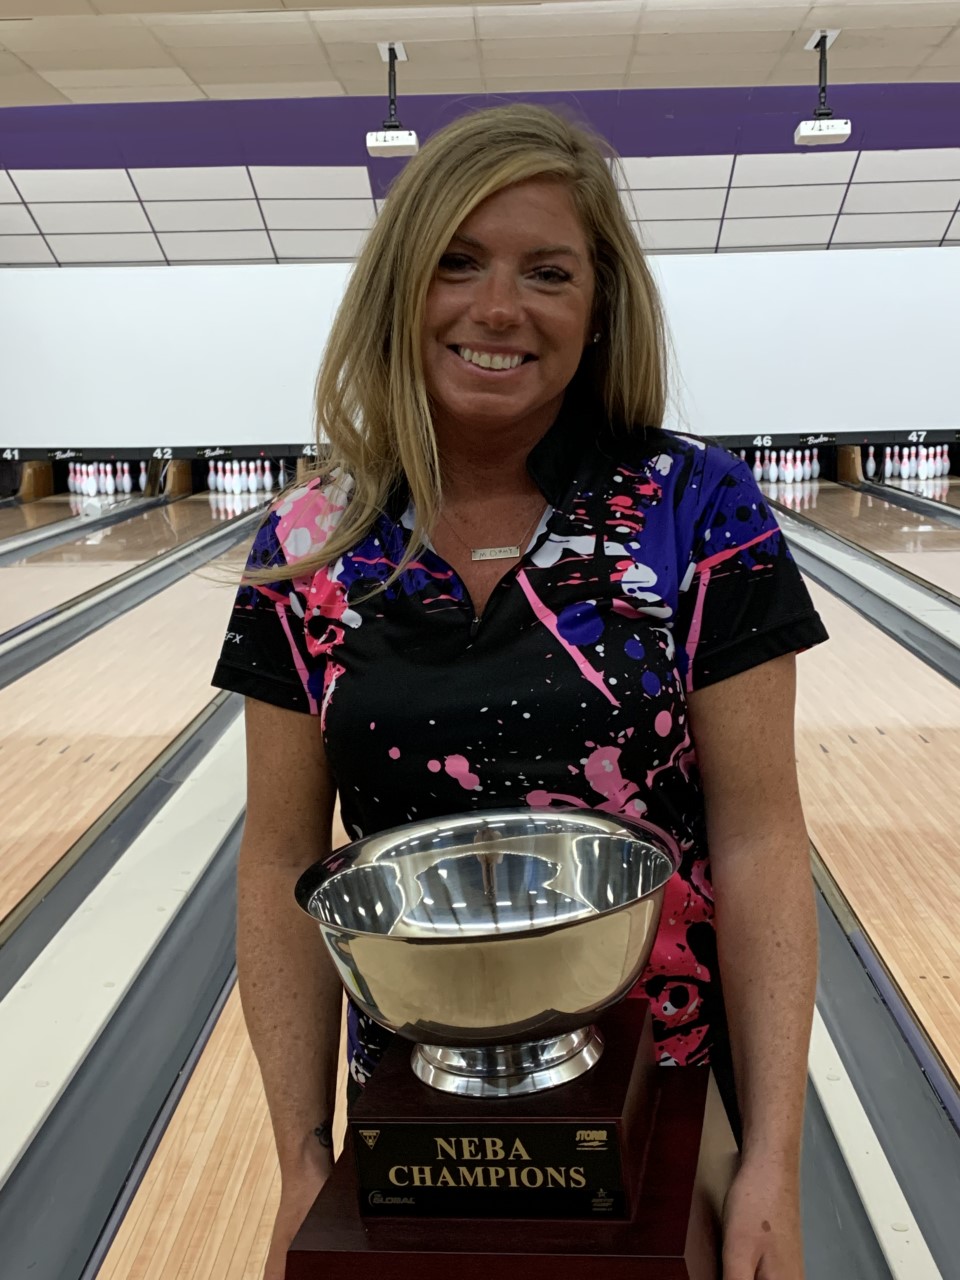 BowlingSeriously.com WOMEN's SINGLES - East Hartford, CT - $ 1,000.00 added